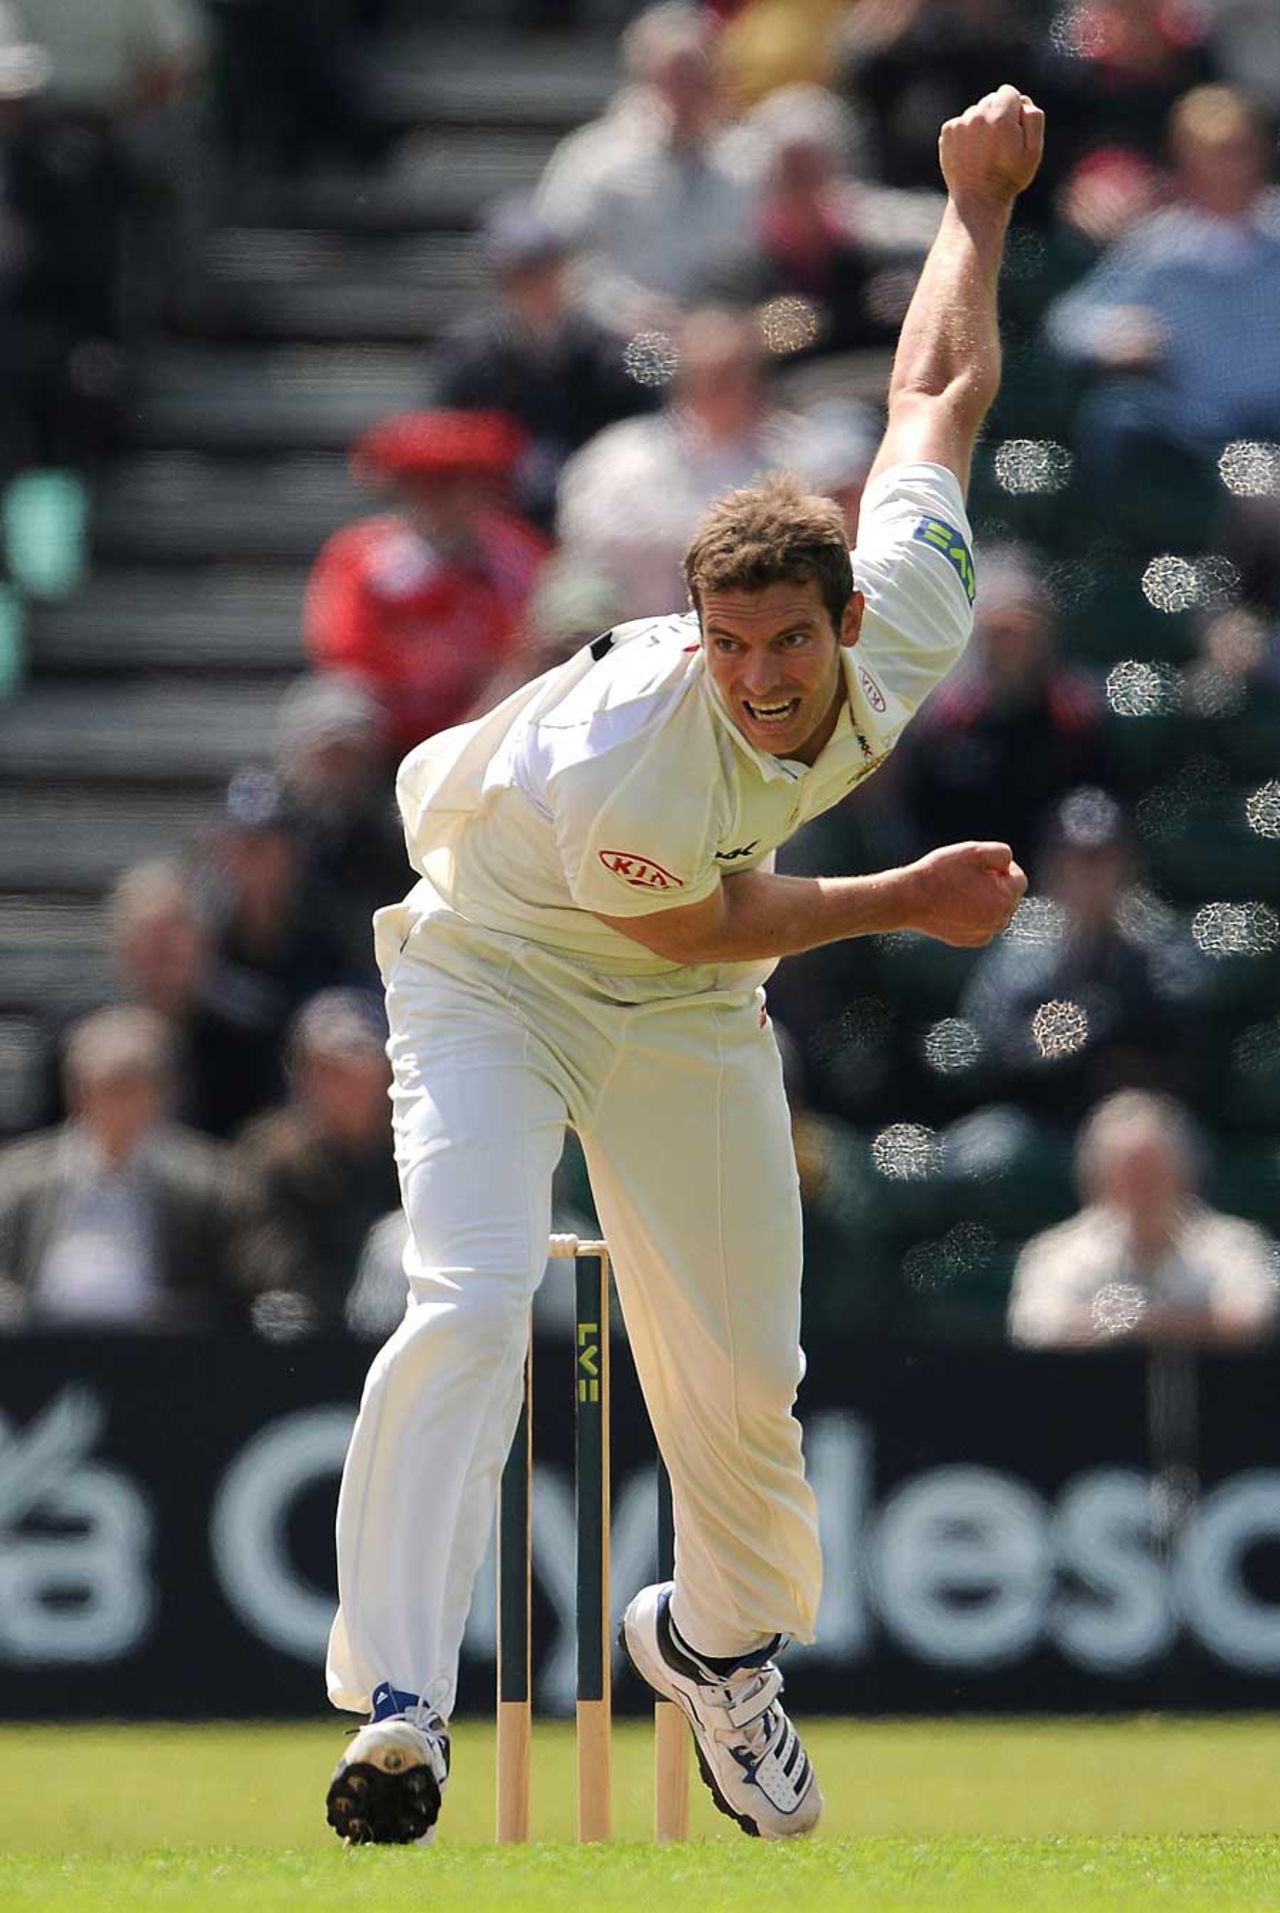 Chris Tremlett was back in Championship action for Surrey, Surrey v Lancashire, County Championship, Division One, Guildford, July 11, 2012